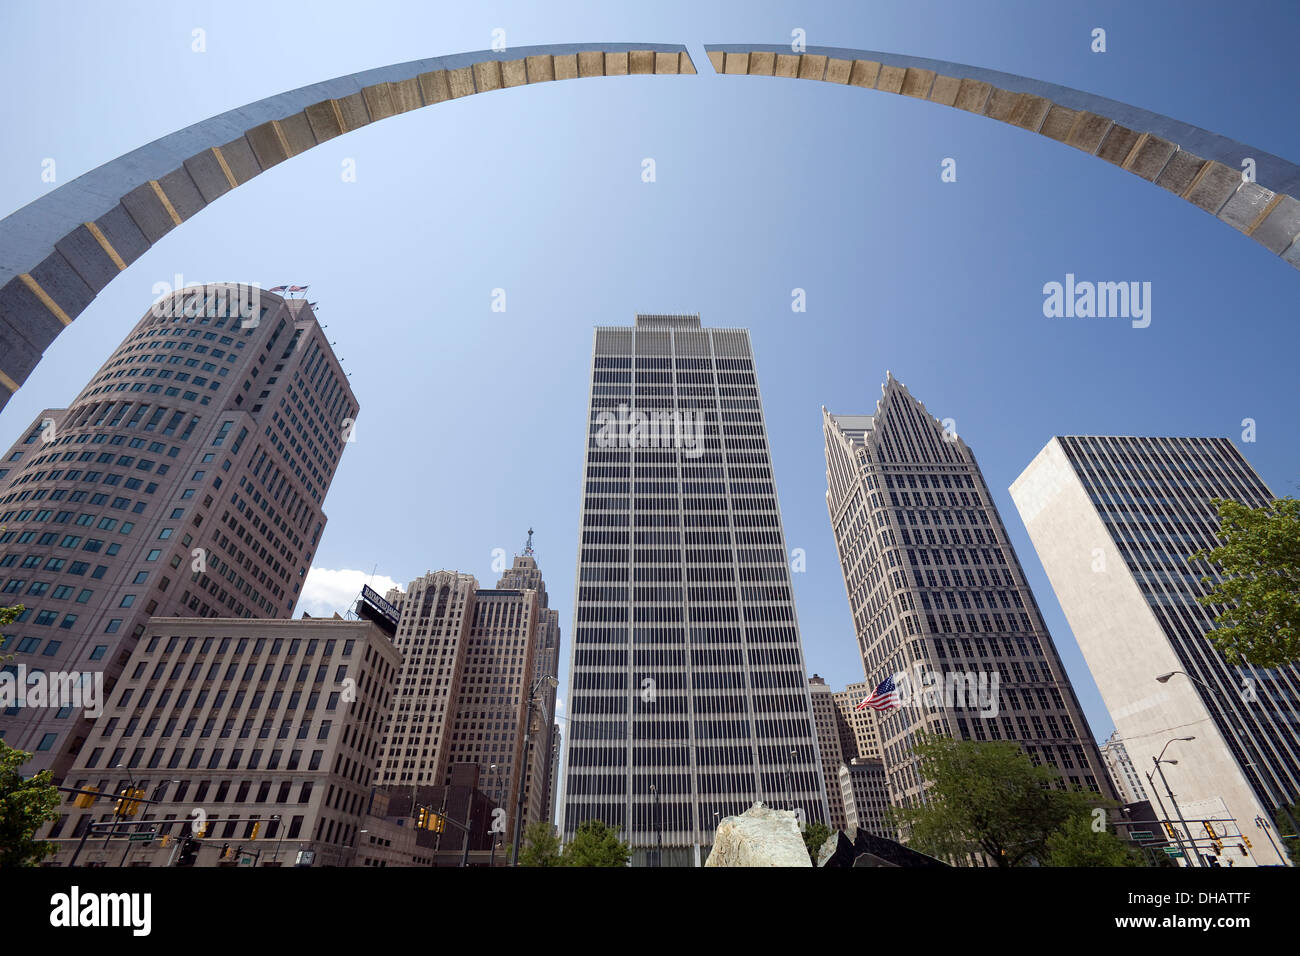 An Arch Sculpture And Skyscrapers In Downtown Detroit; Detroit, Michigan, United States Of America Stock Photo